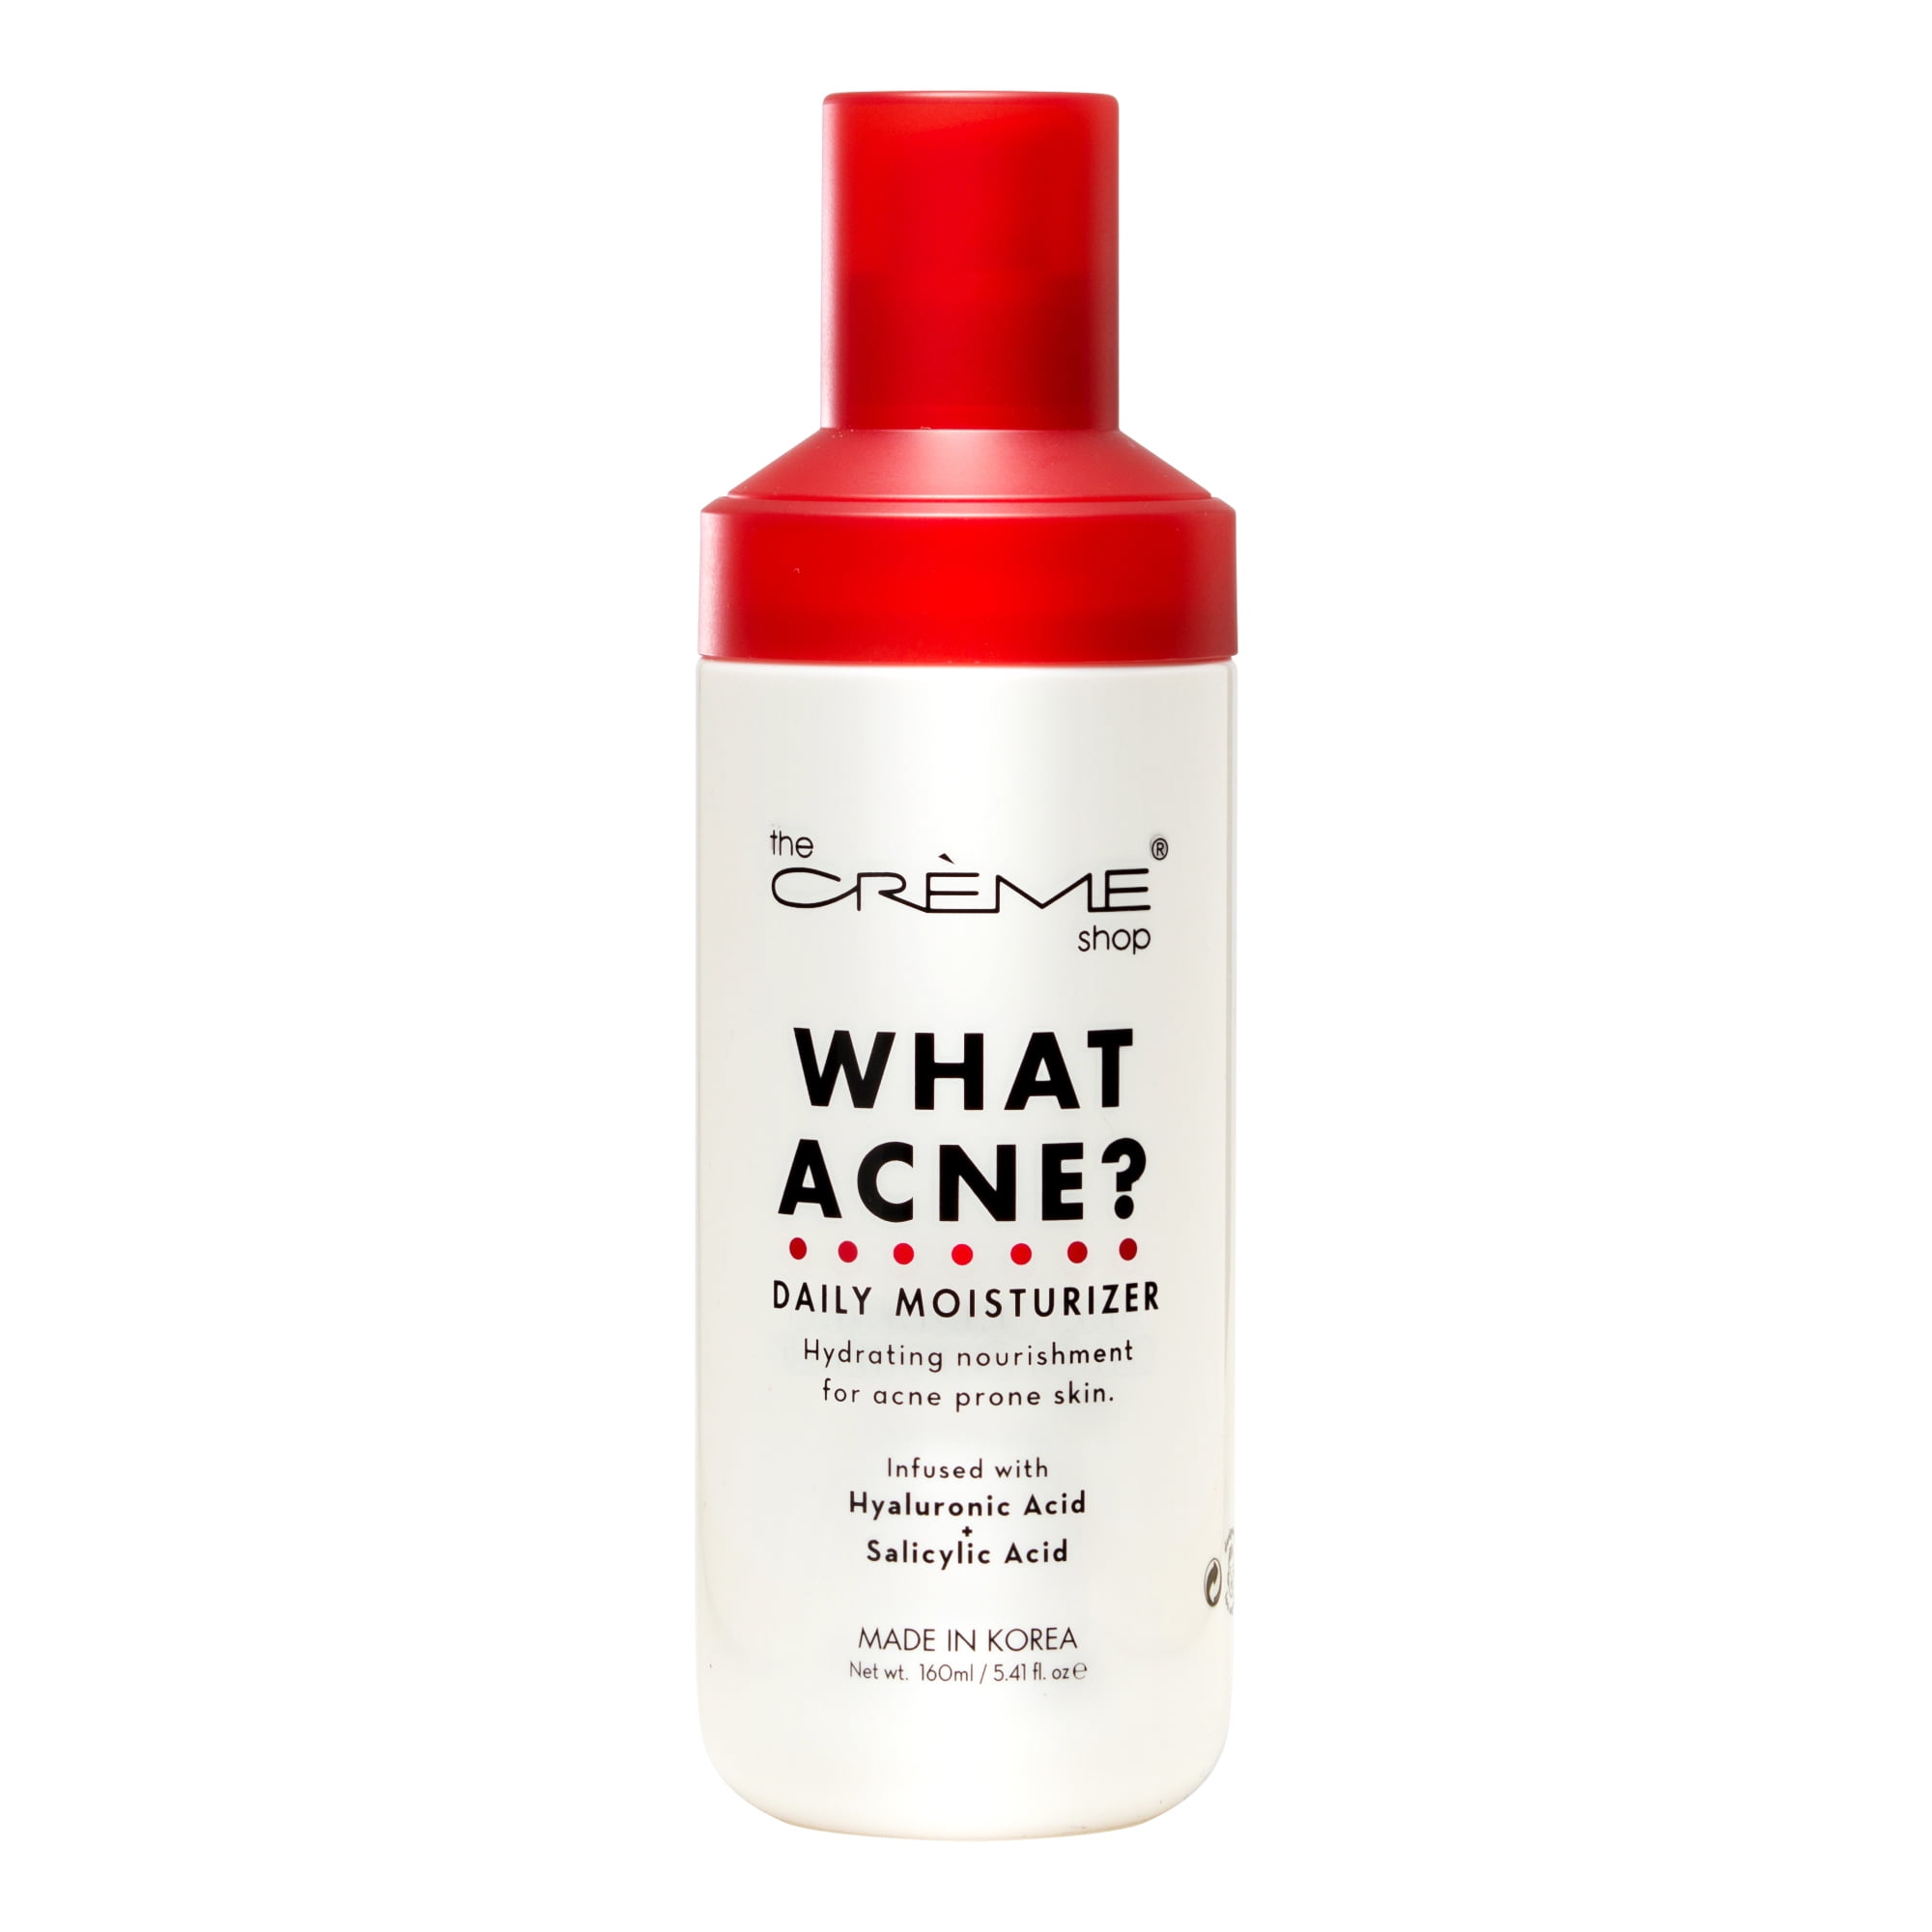 The Crme Shop What Acne? Daily Moisturizer for Acne Prone Skin, 5.41 fl. oz.